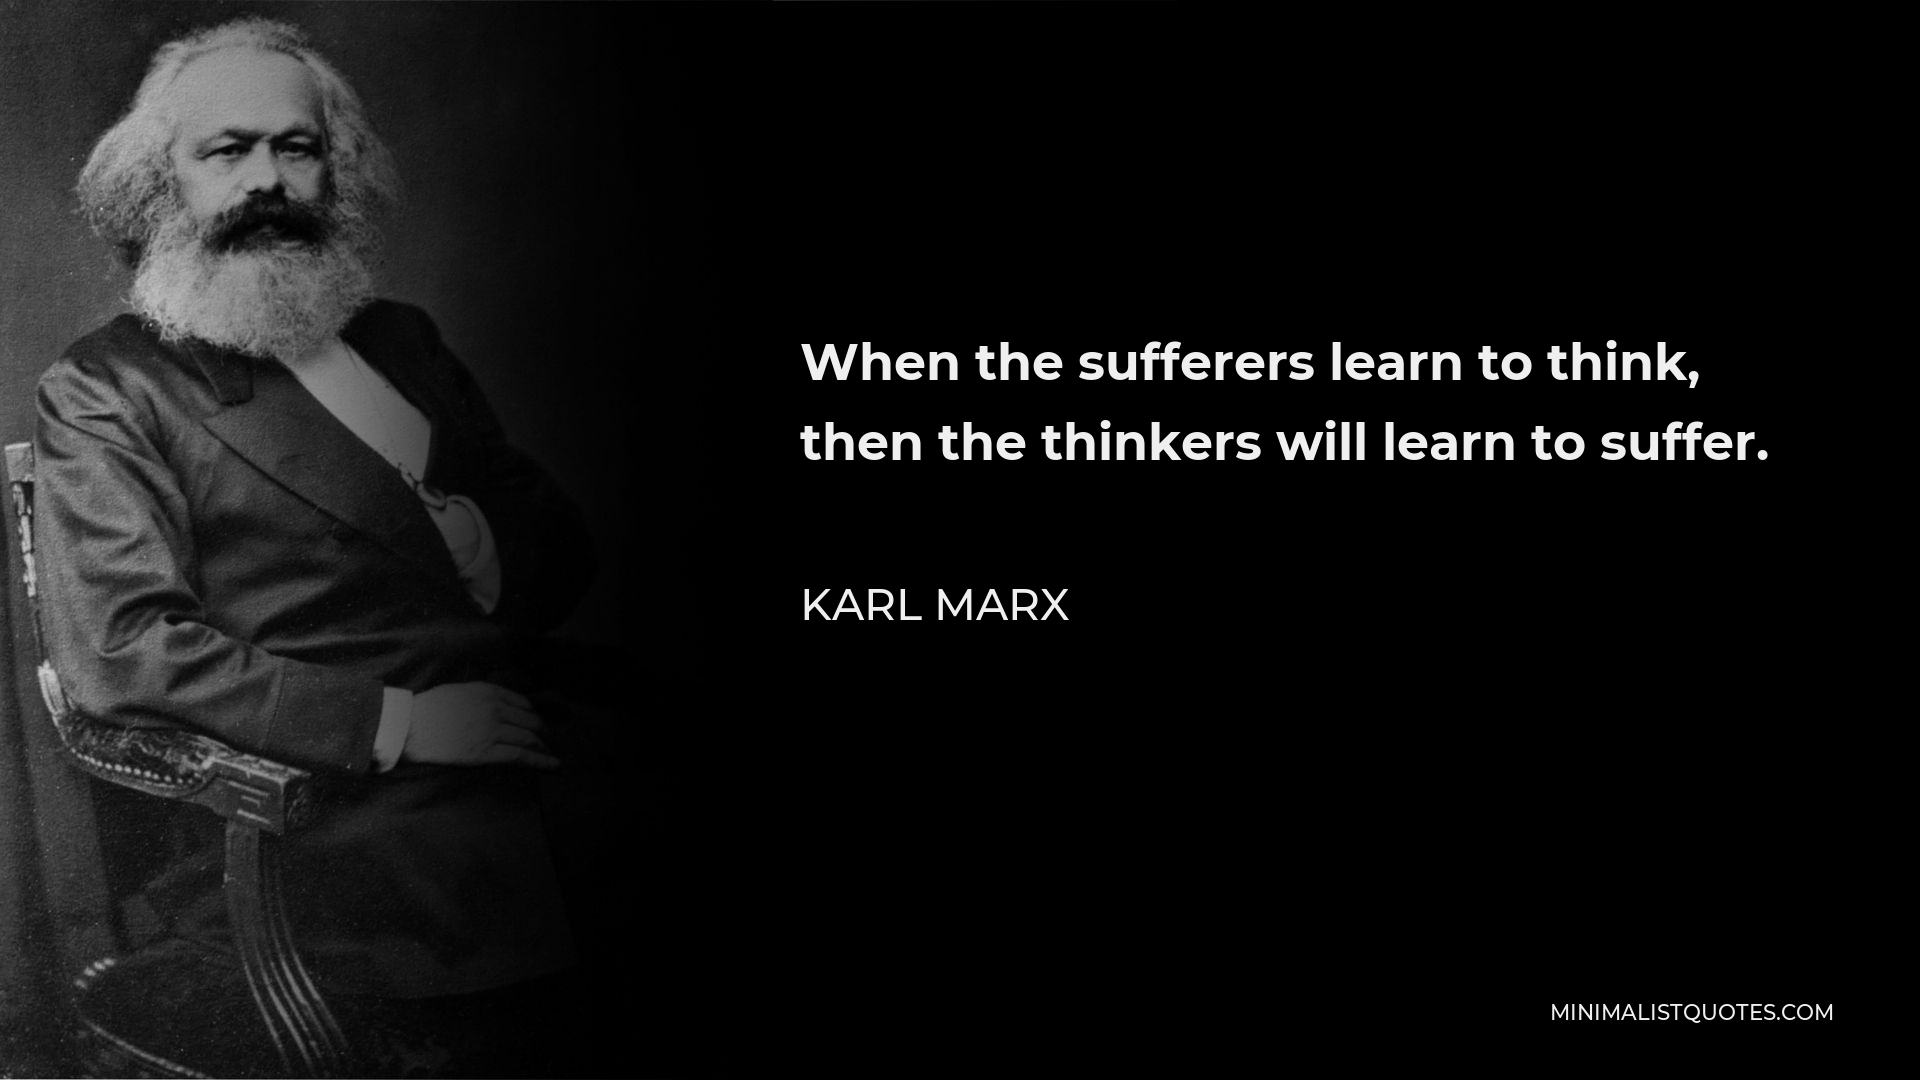 Karl Marx Quote - When the sufferers learn to think, then the thinkers will learn to suffer.